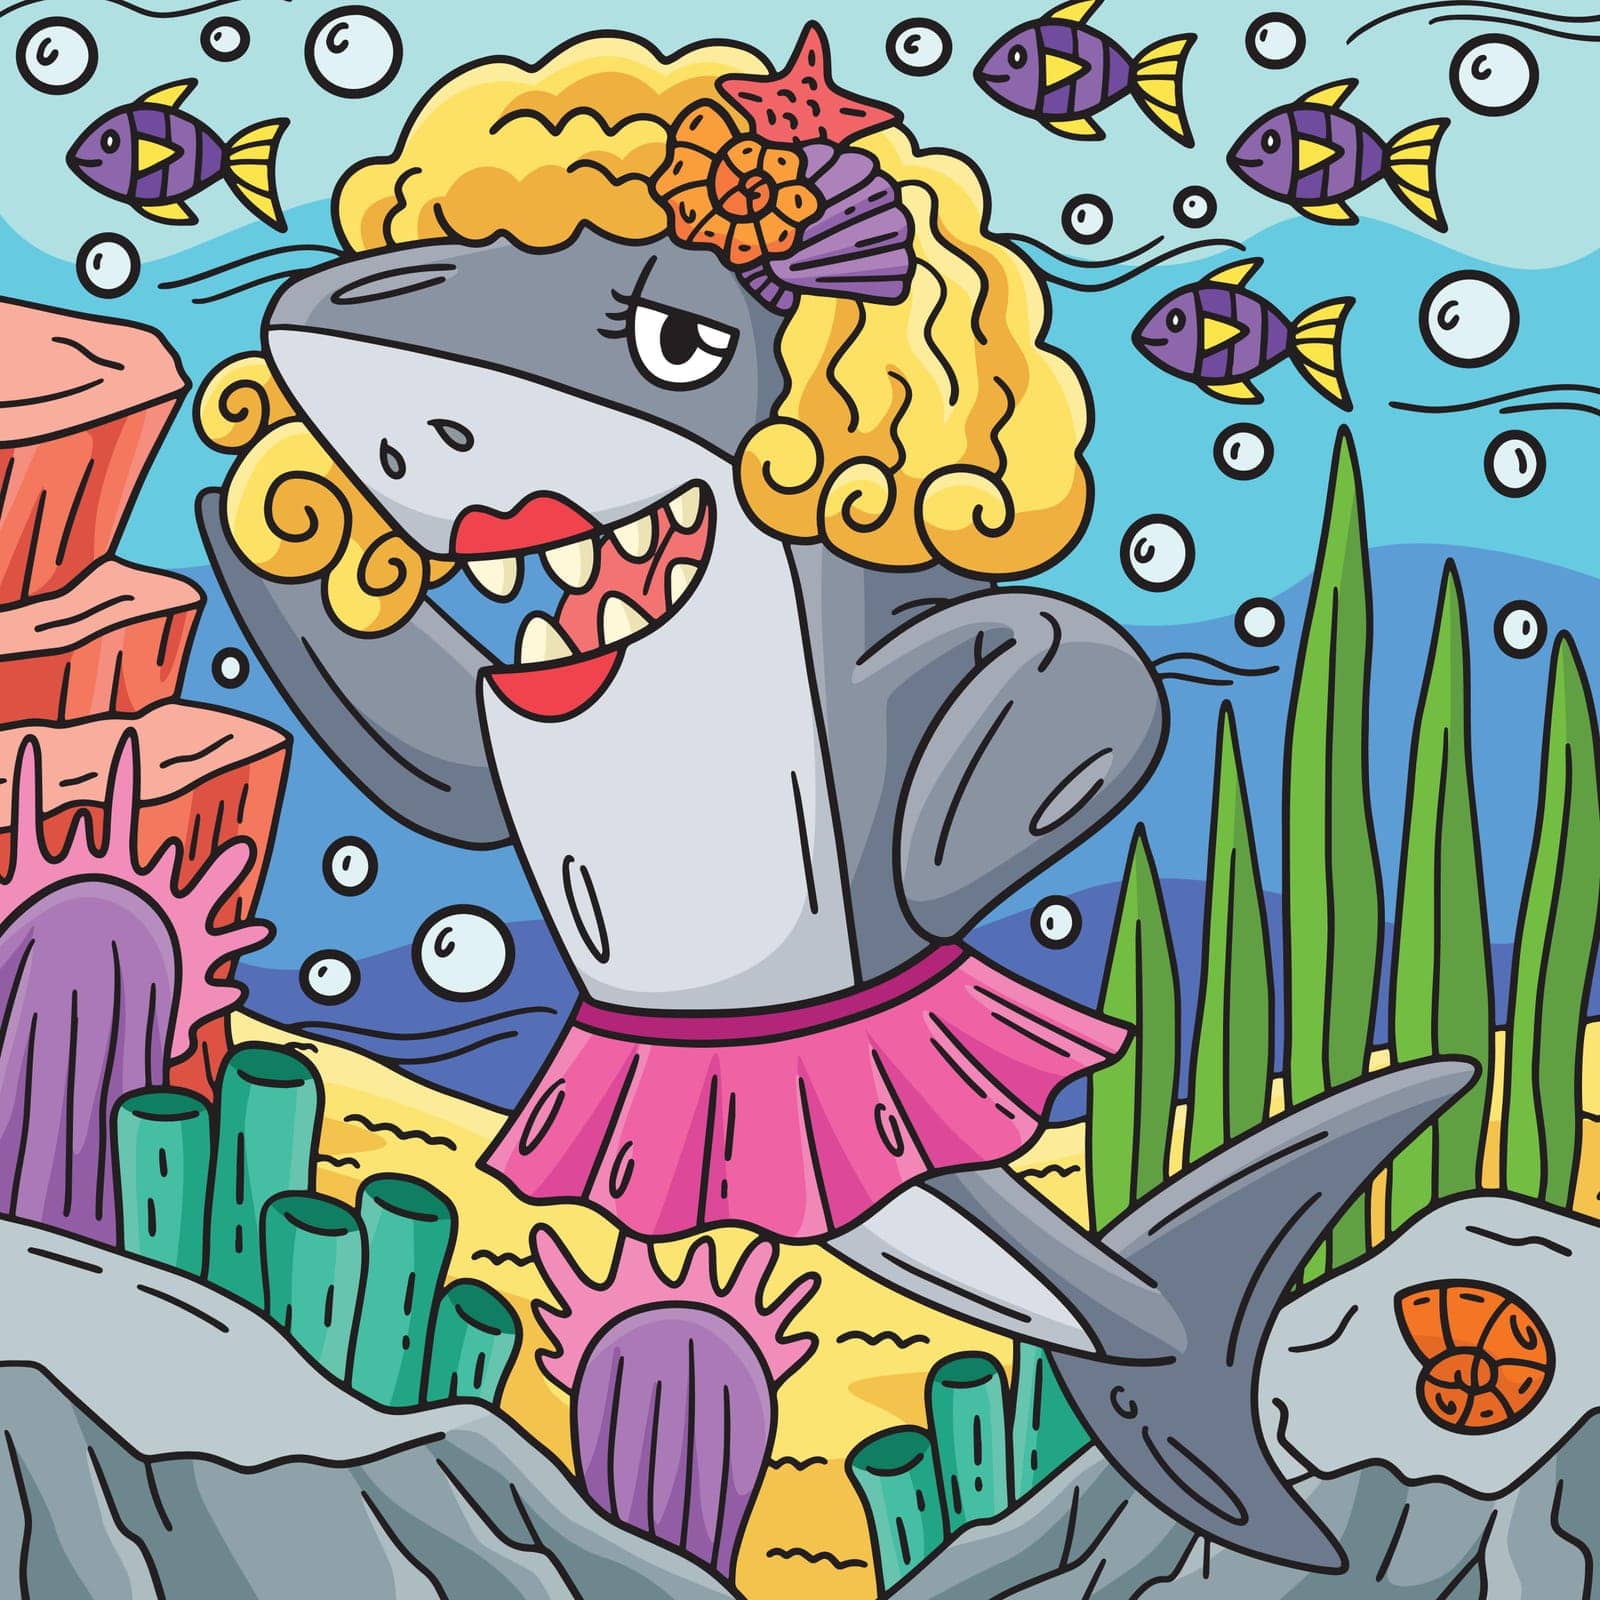 This cartoon clipart shows a Shark Wearing Wig and Skirt illustration.